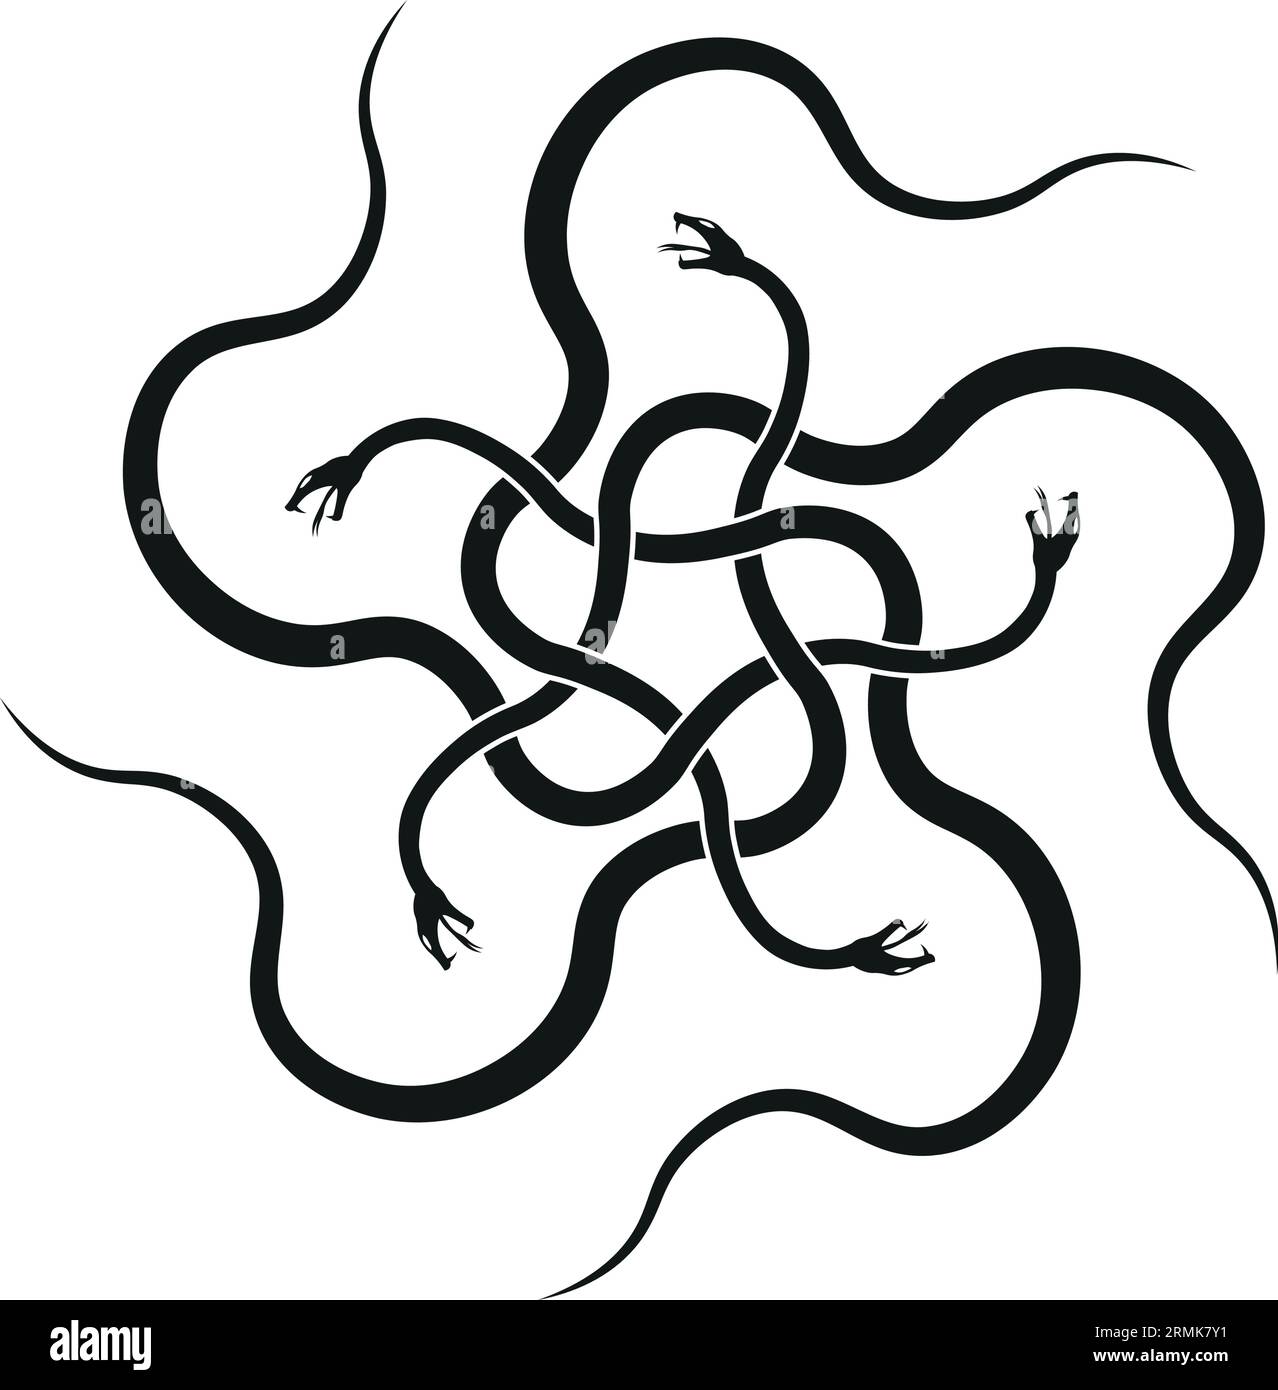 five serpents intertwine, forming an enigmatic pentagram of spiritual insight. Stock Vector